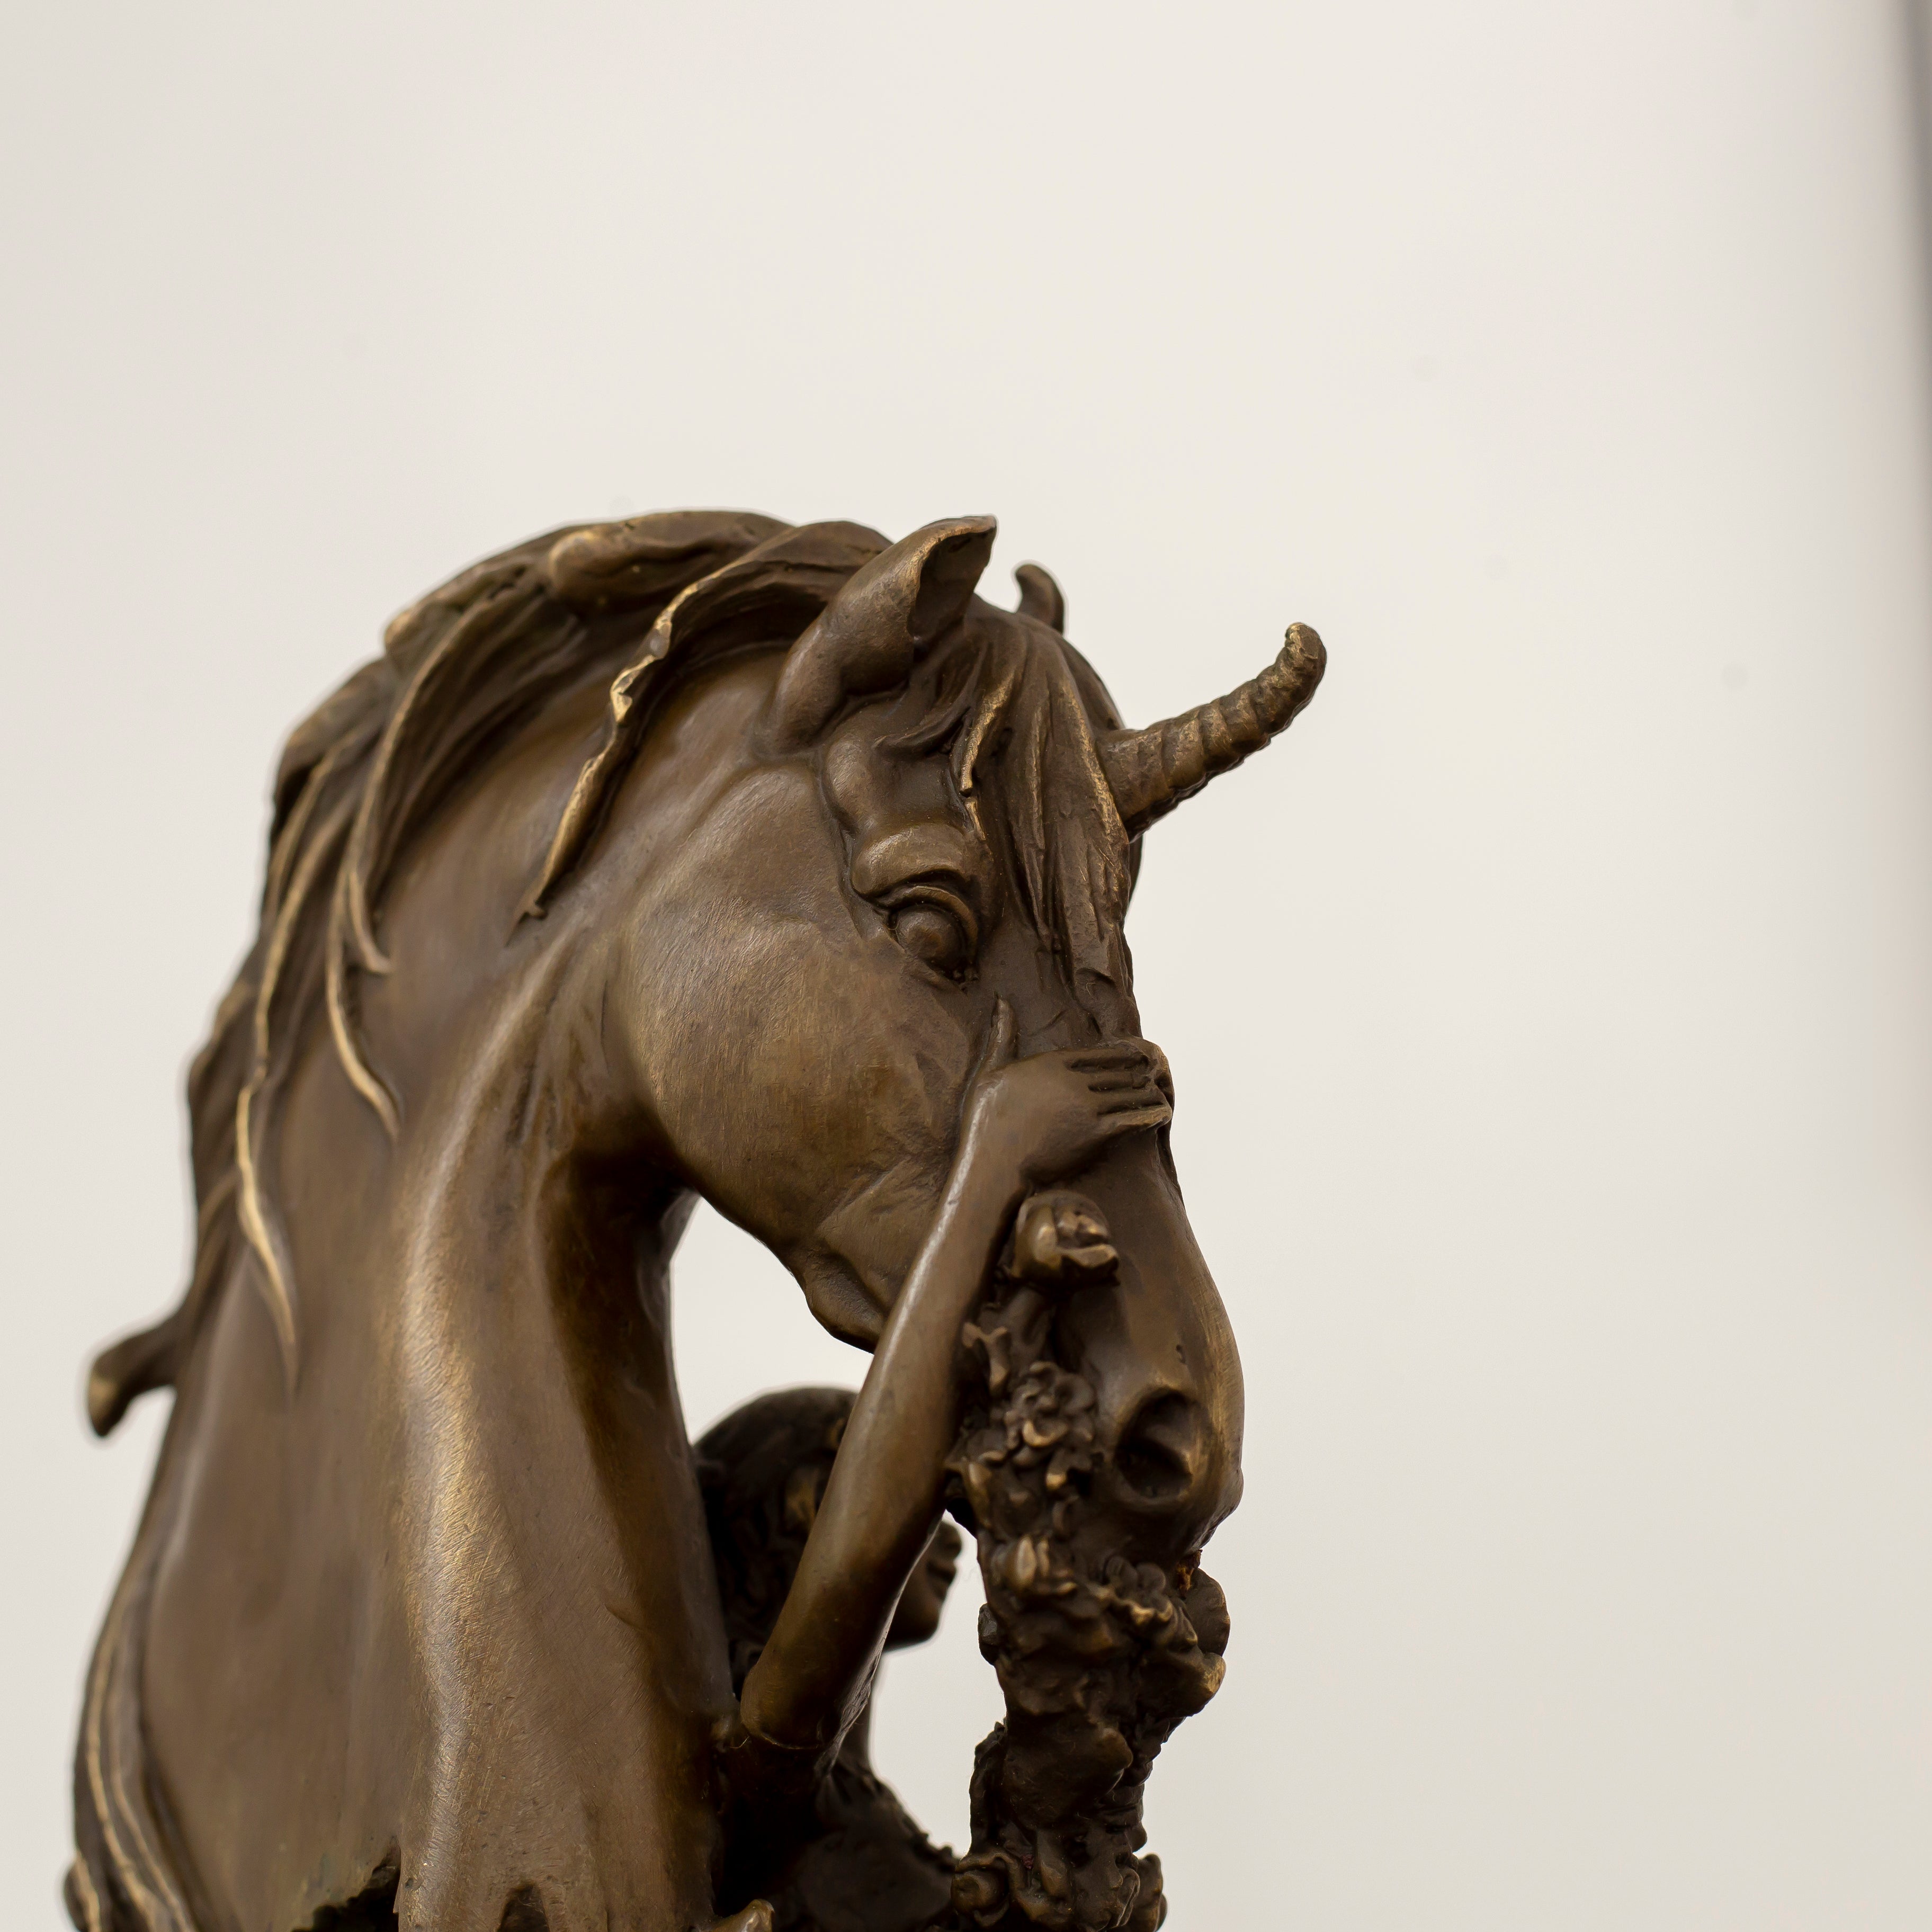 Unicorn and Angel Bronze Statue, 12.8" Tabletop Display Bronze Art Sculpture with Marble Base, Perfect for Home Decor and Gifts